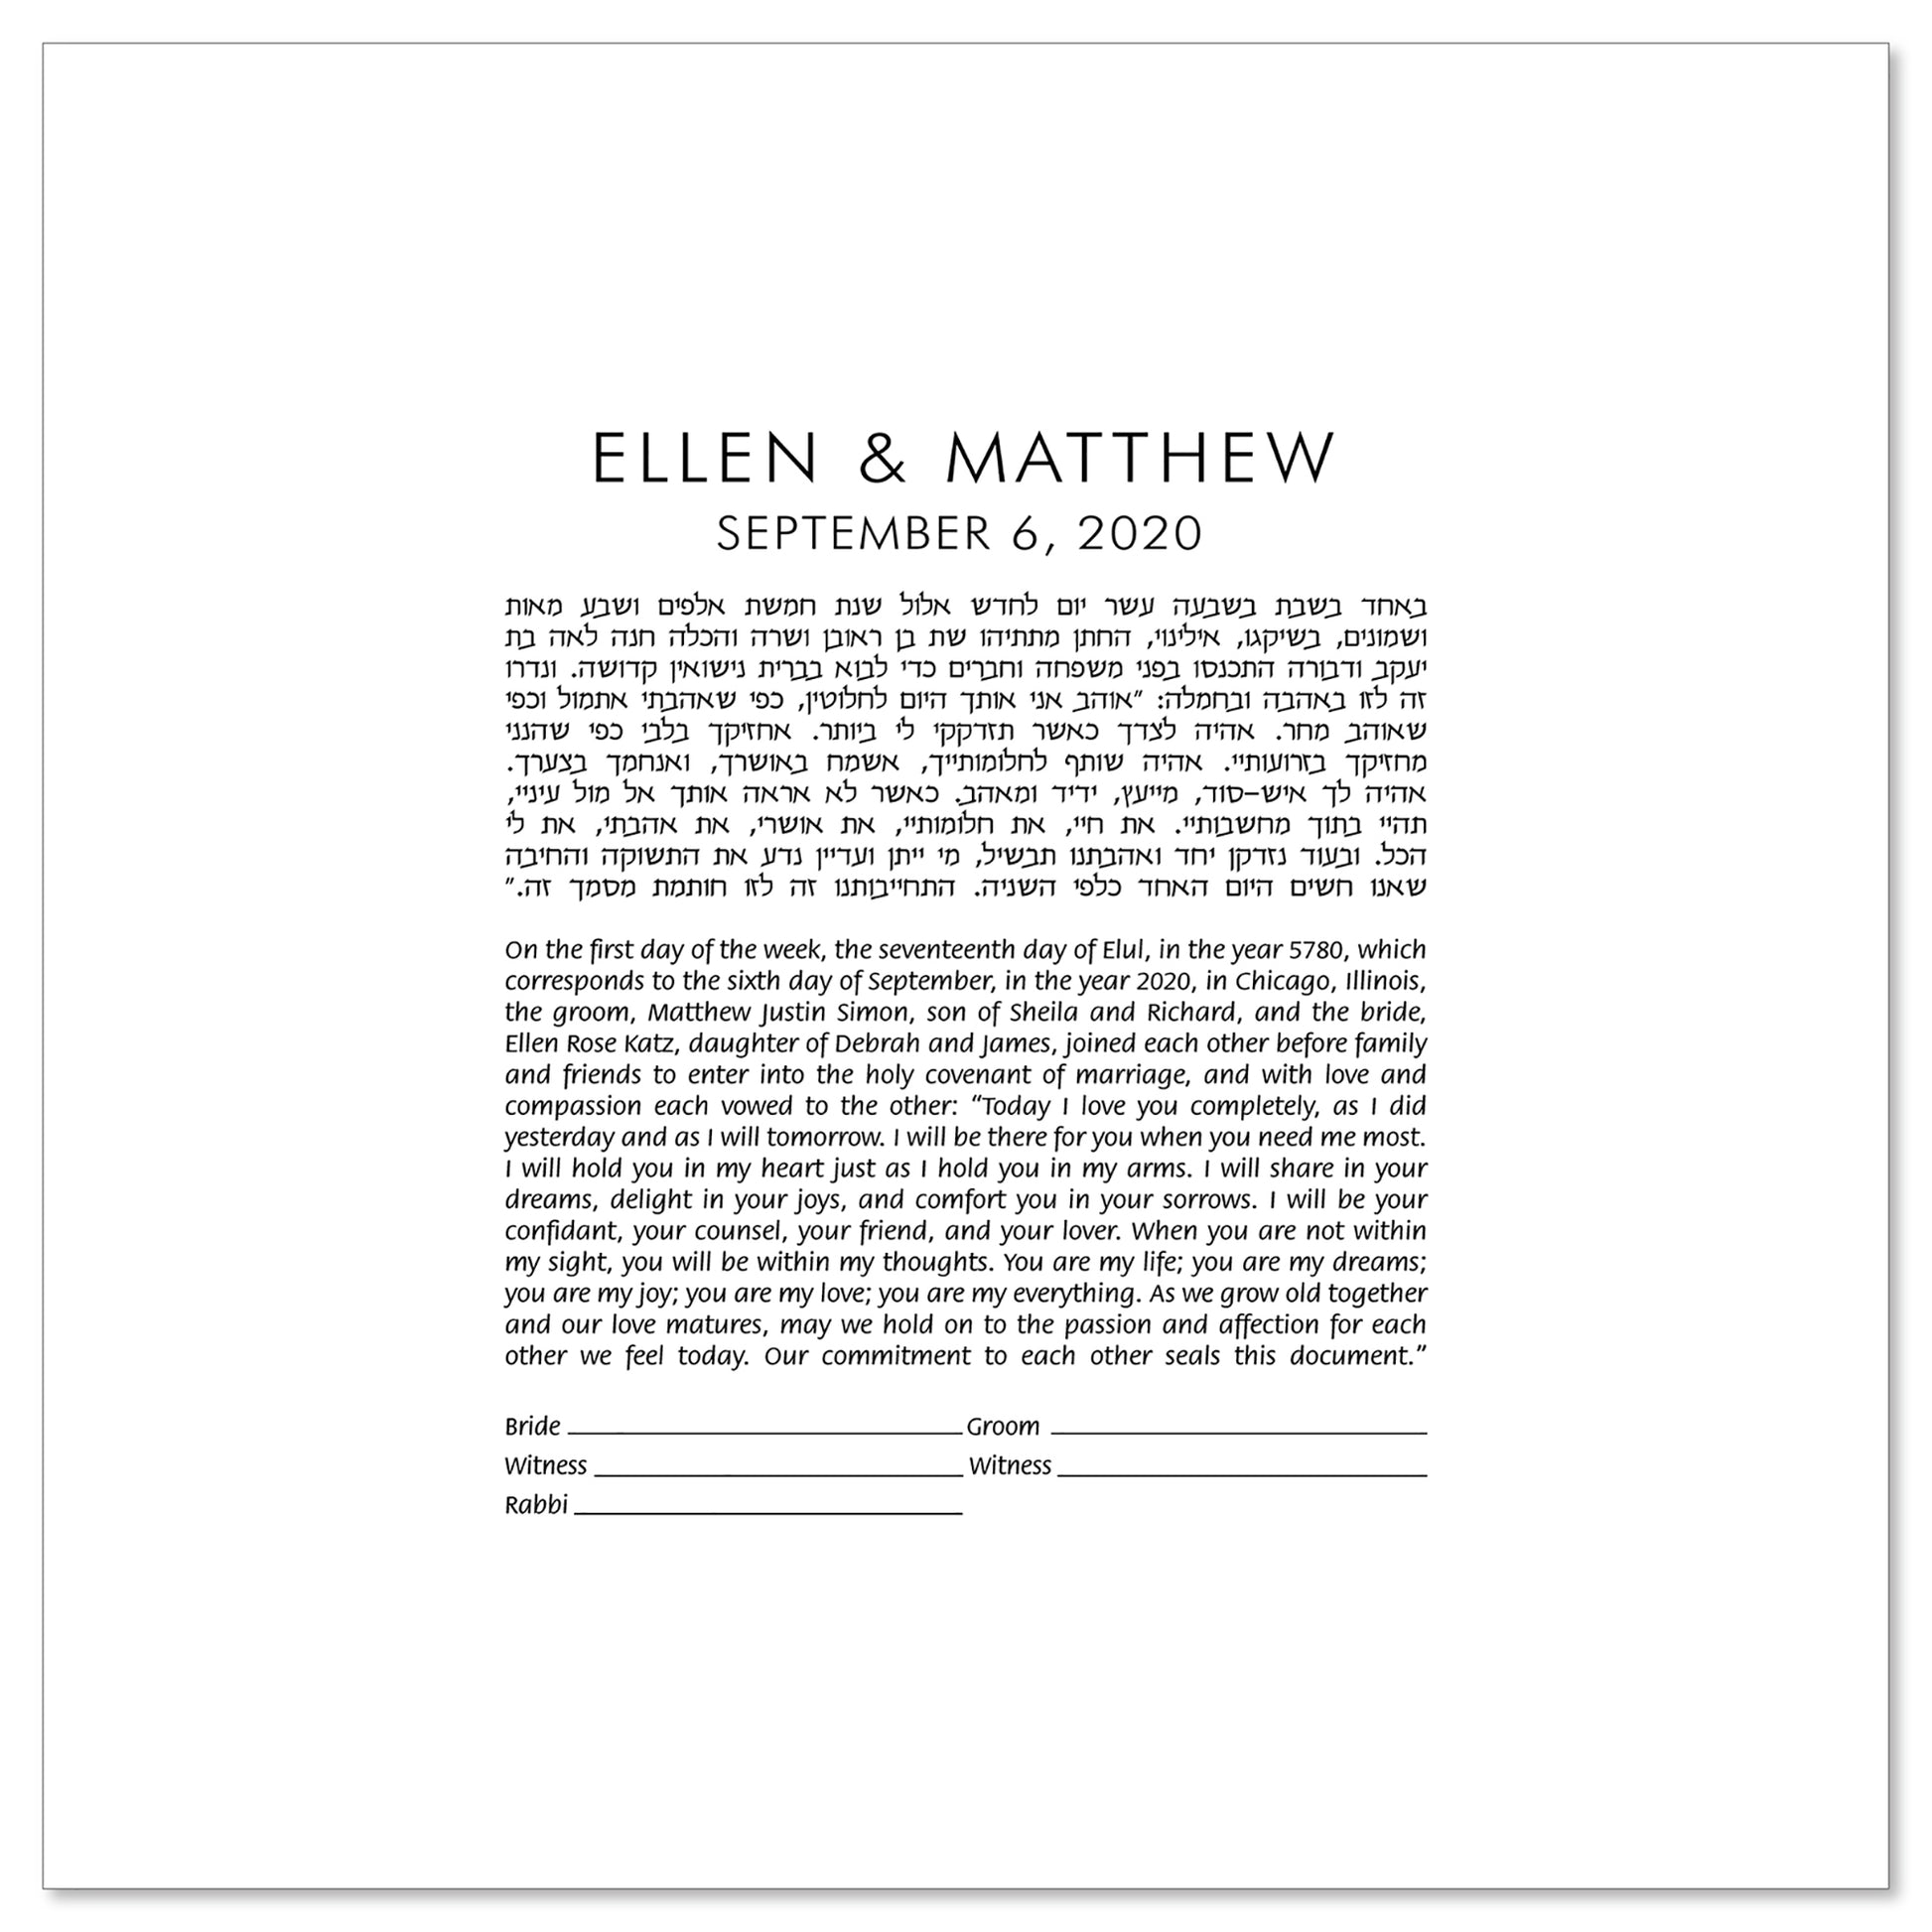 Text Only - Square ketubah by Micah Parker features the couples name and wedding date above the square ketubah text.